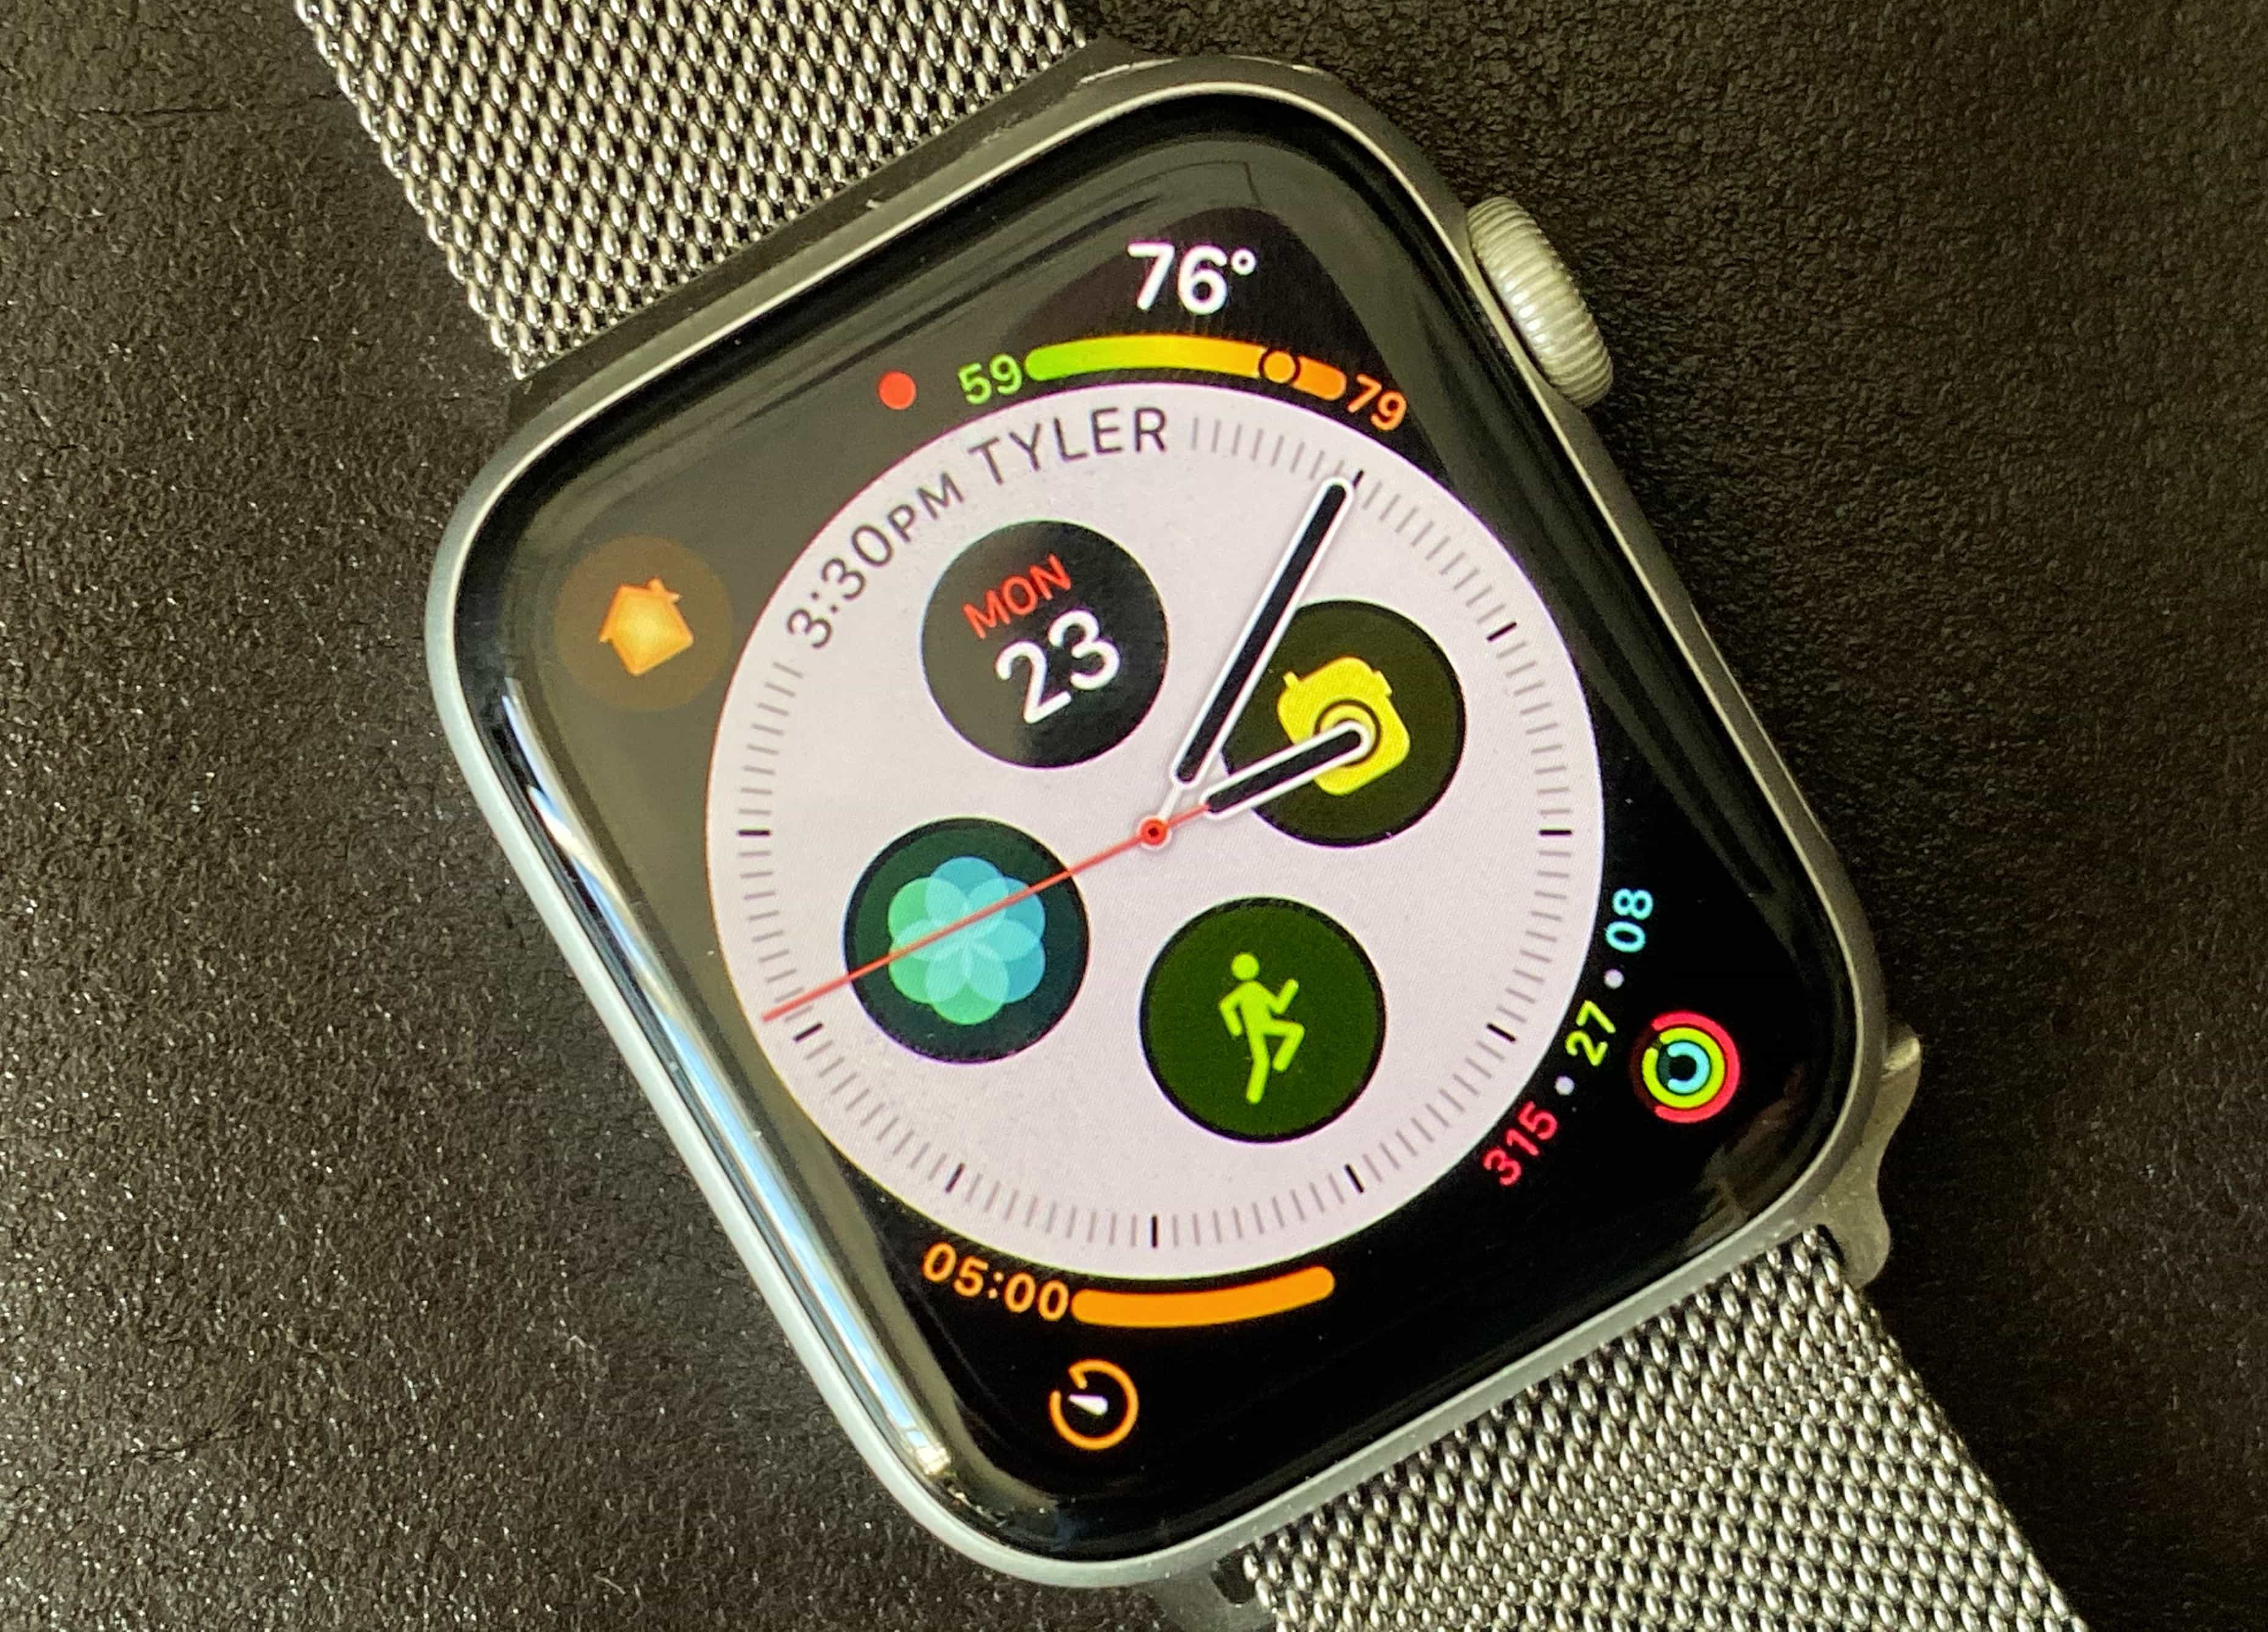 Restore the color complications to your Infograph Apple Watch face.